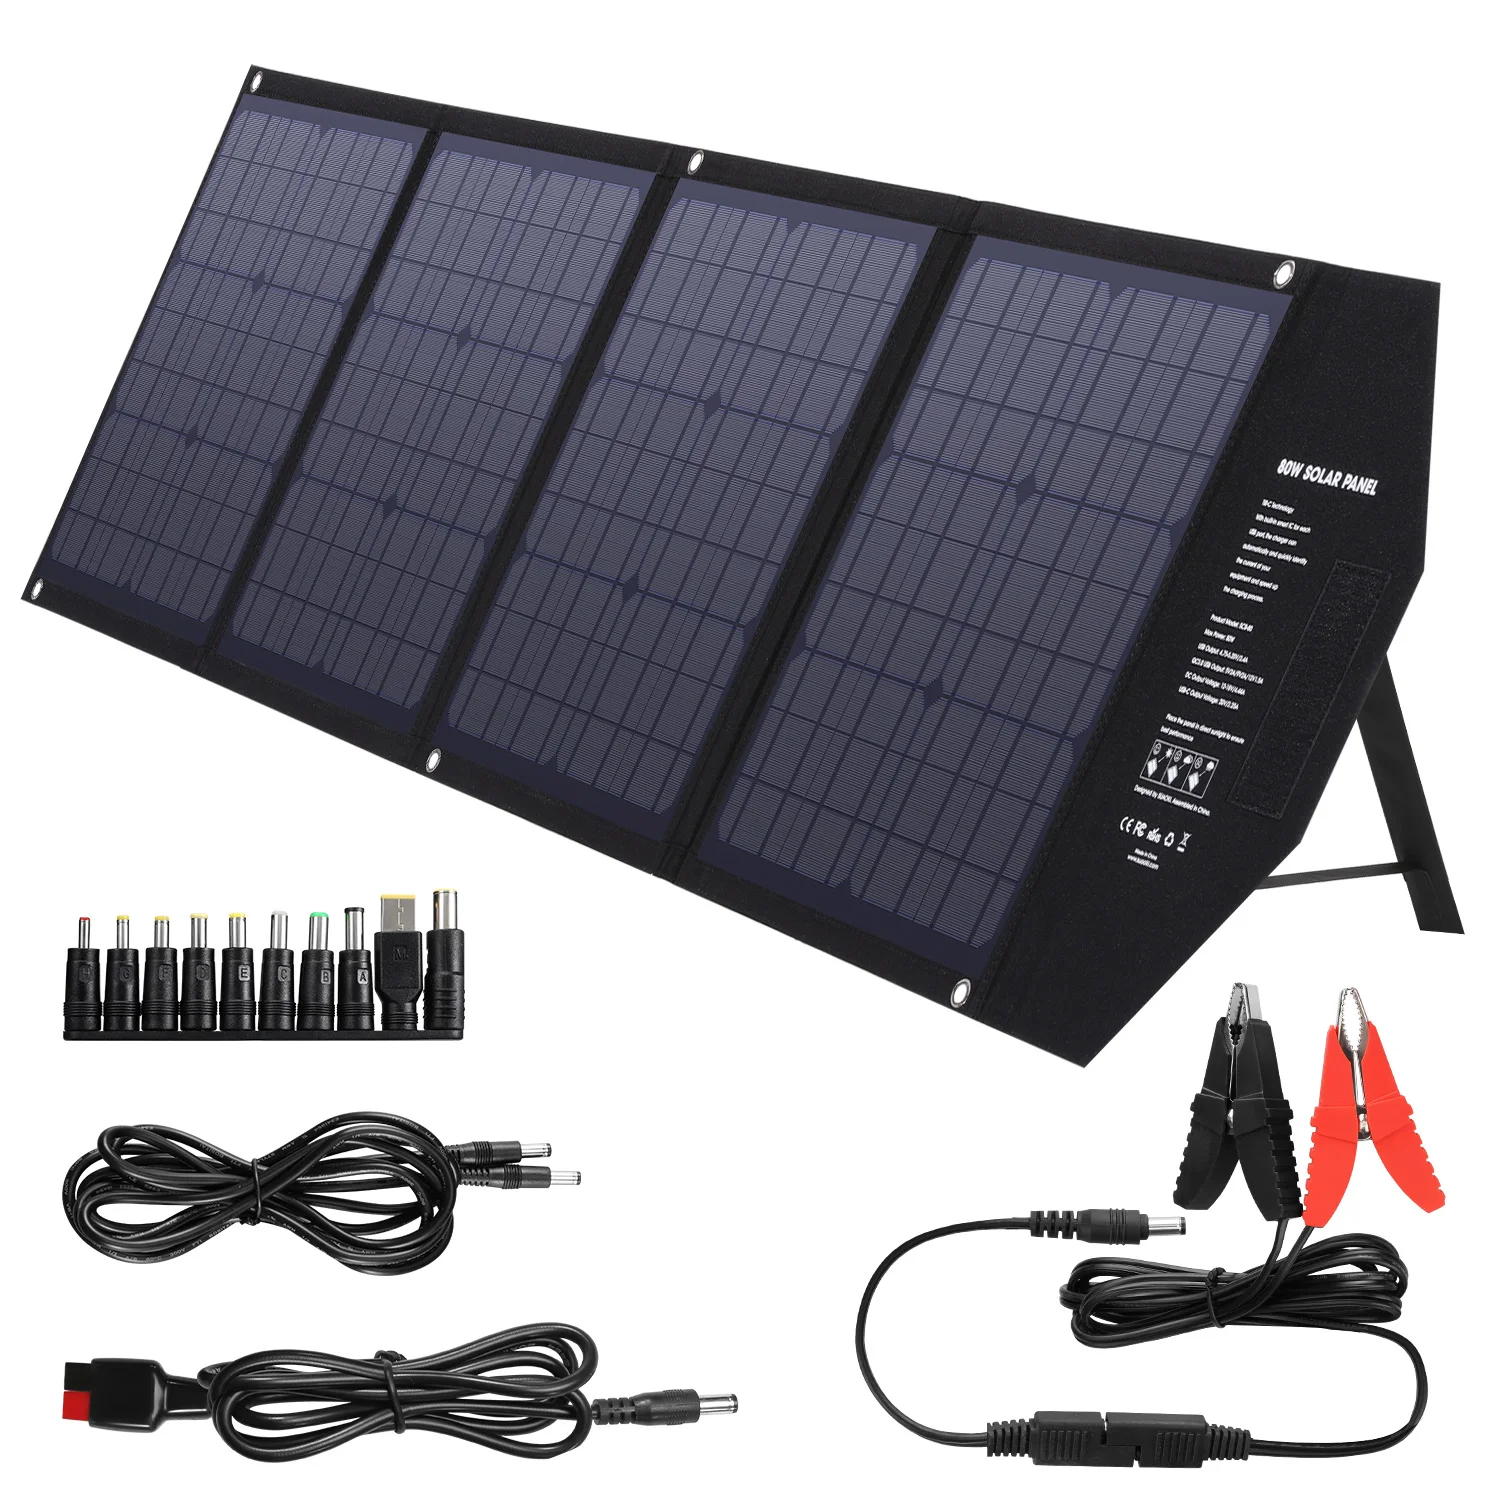 Waterproof 80W Foldable Solar Panel 18V 2 USB Battery Charger For Phone Laptop 